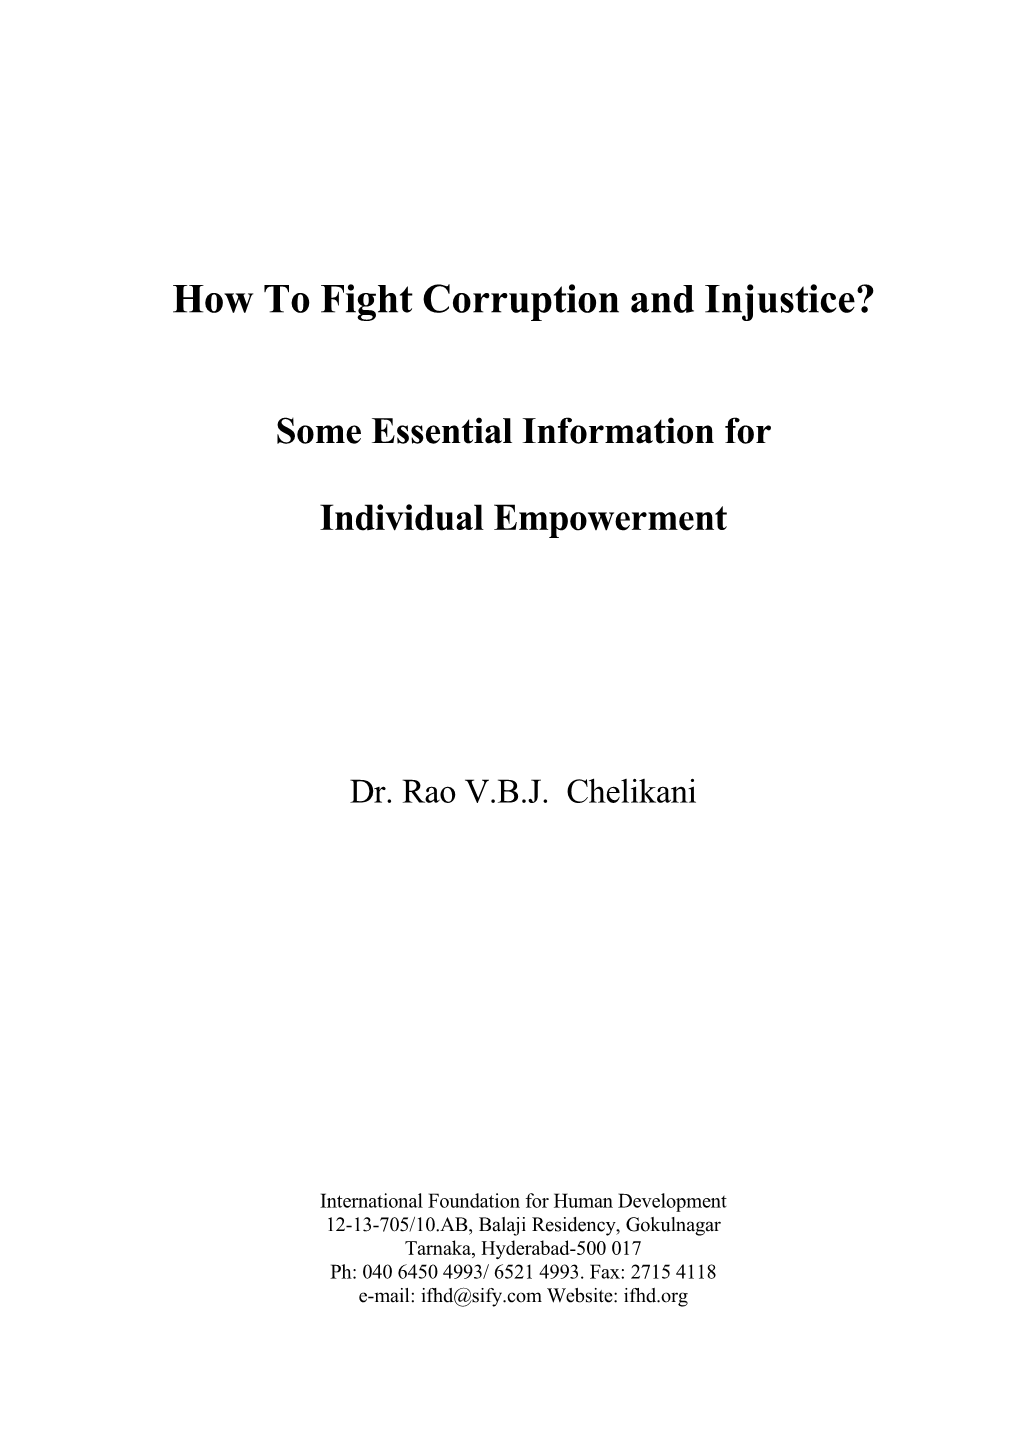 How to Fight Against Corruption and Injustice